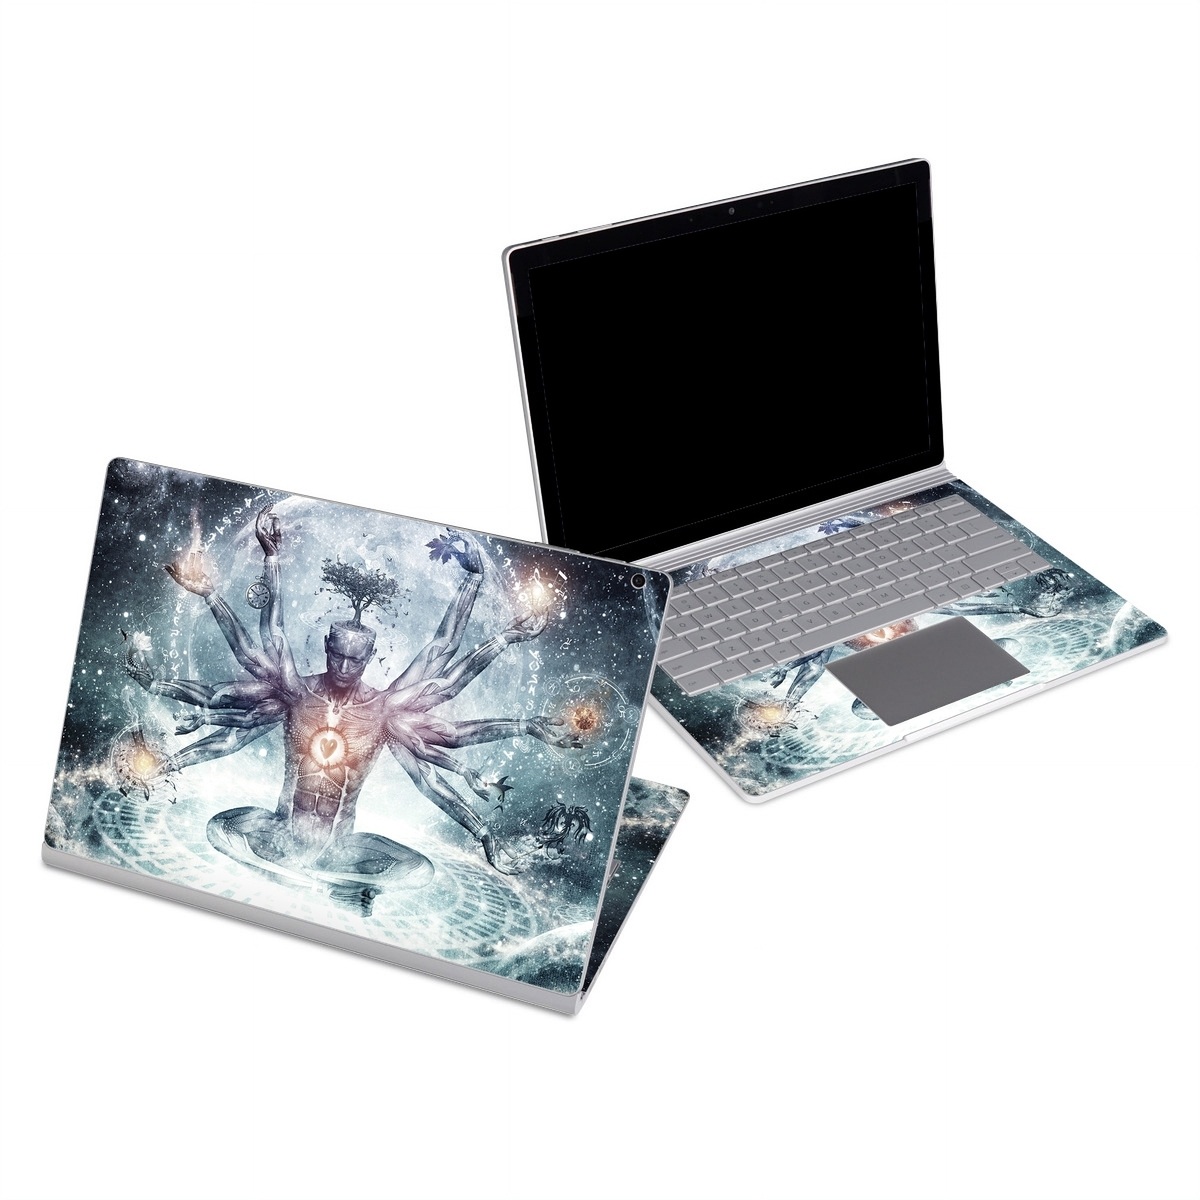 Microsoft Surface Book Series Skin design of Mythology, Cg artwork, Water, Illustration, Fictional character, Space, Graphics, Art, Graphic design, with blue, red, orange, black, white colors